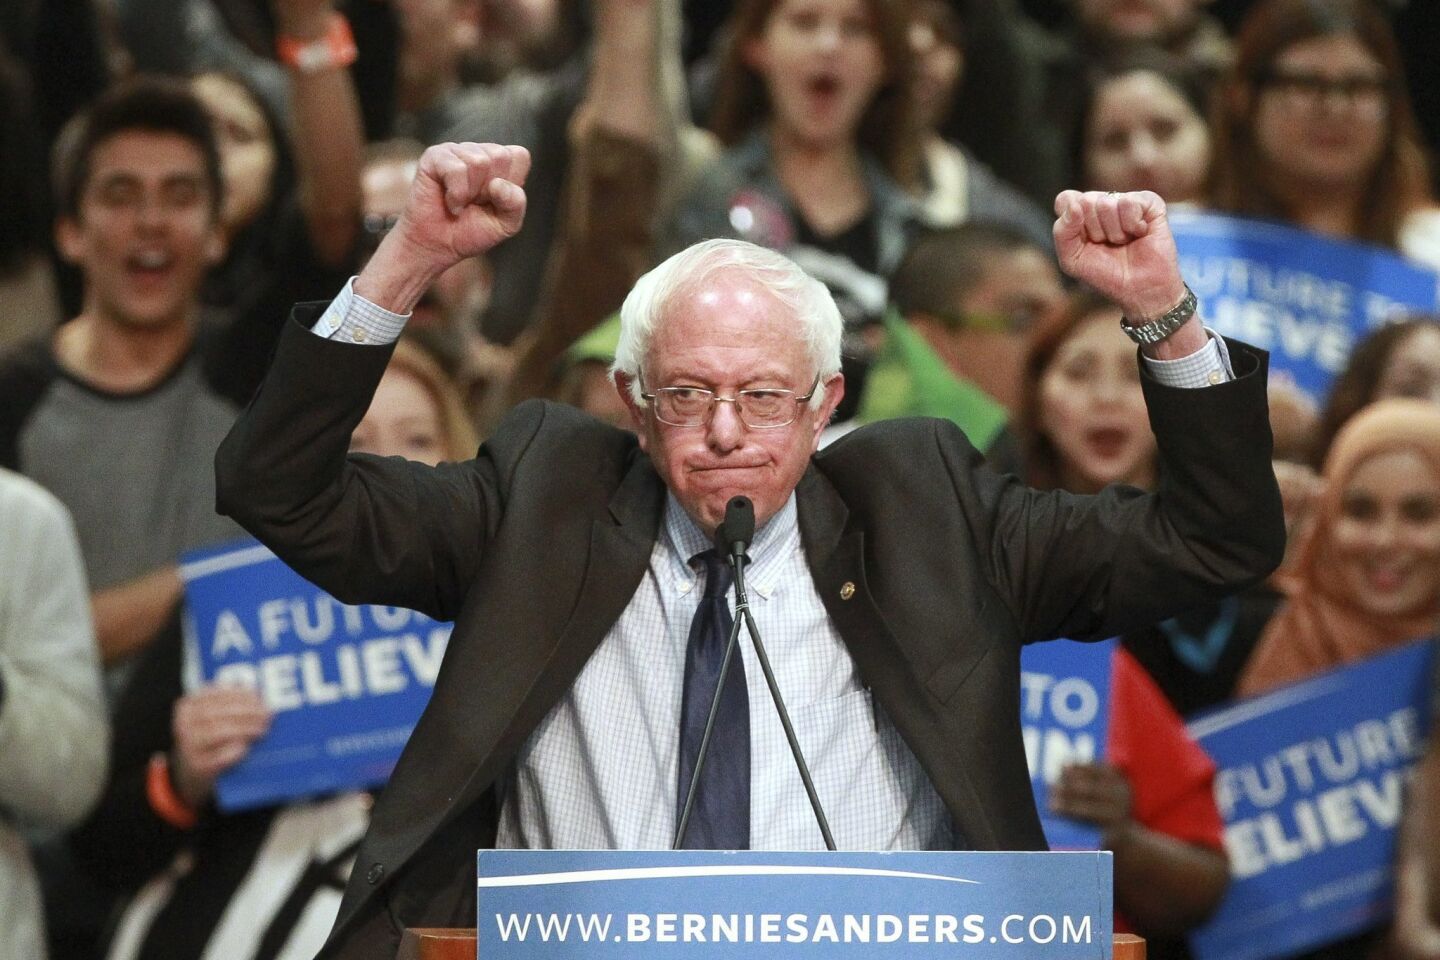 Democratic presidential candidate Bernie Sanders holds up his fists as he speaks to a crowd of supporters.